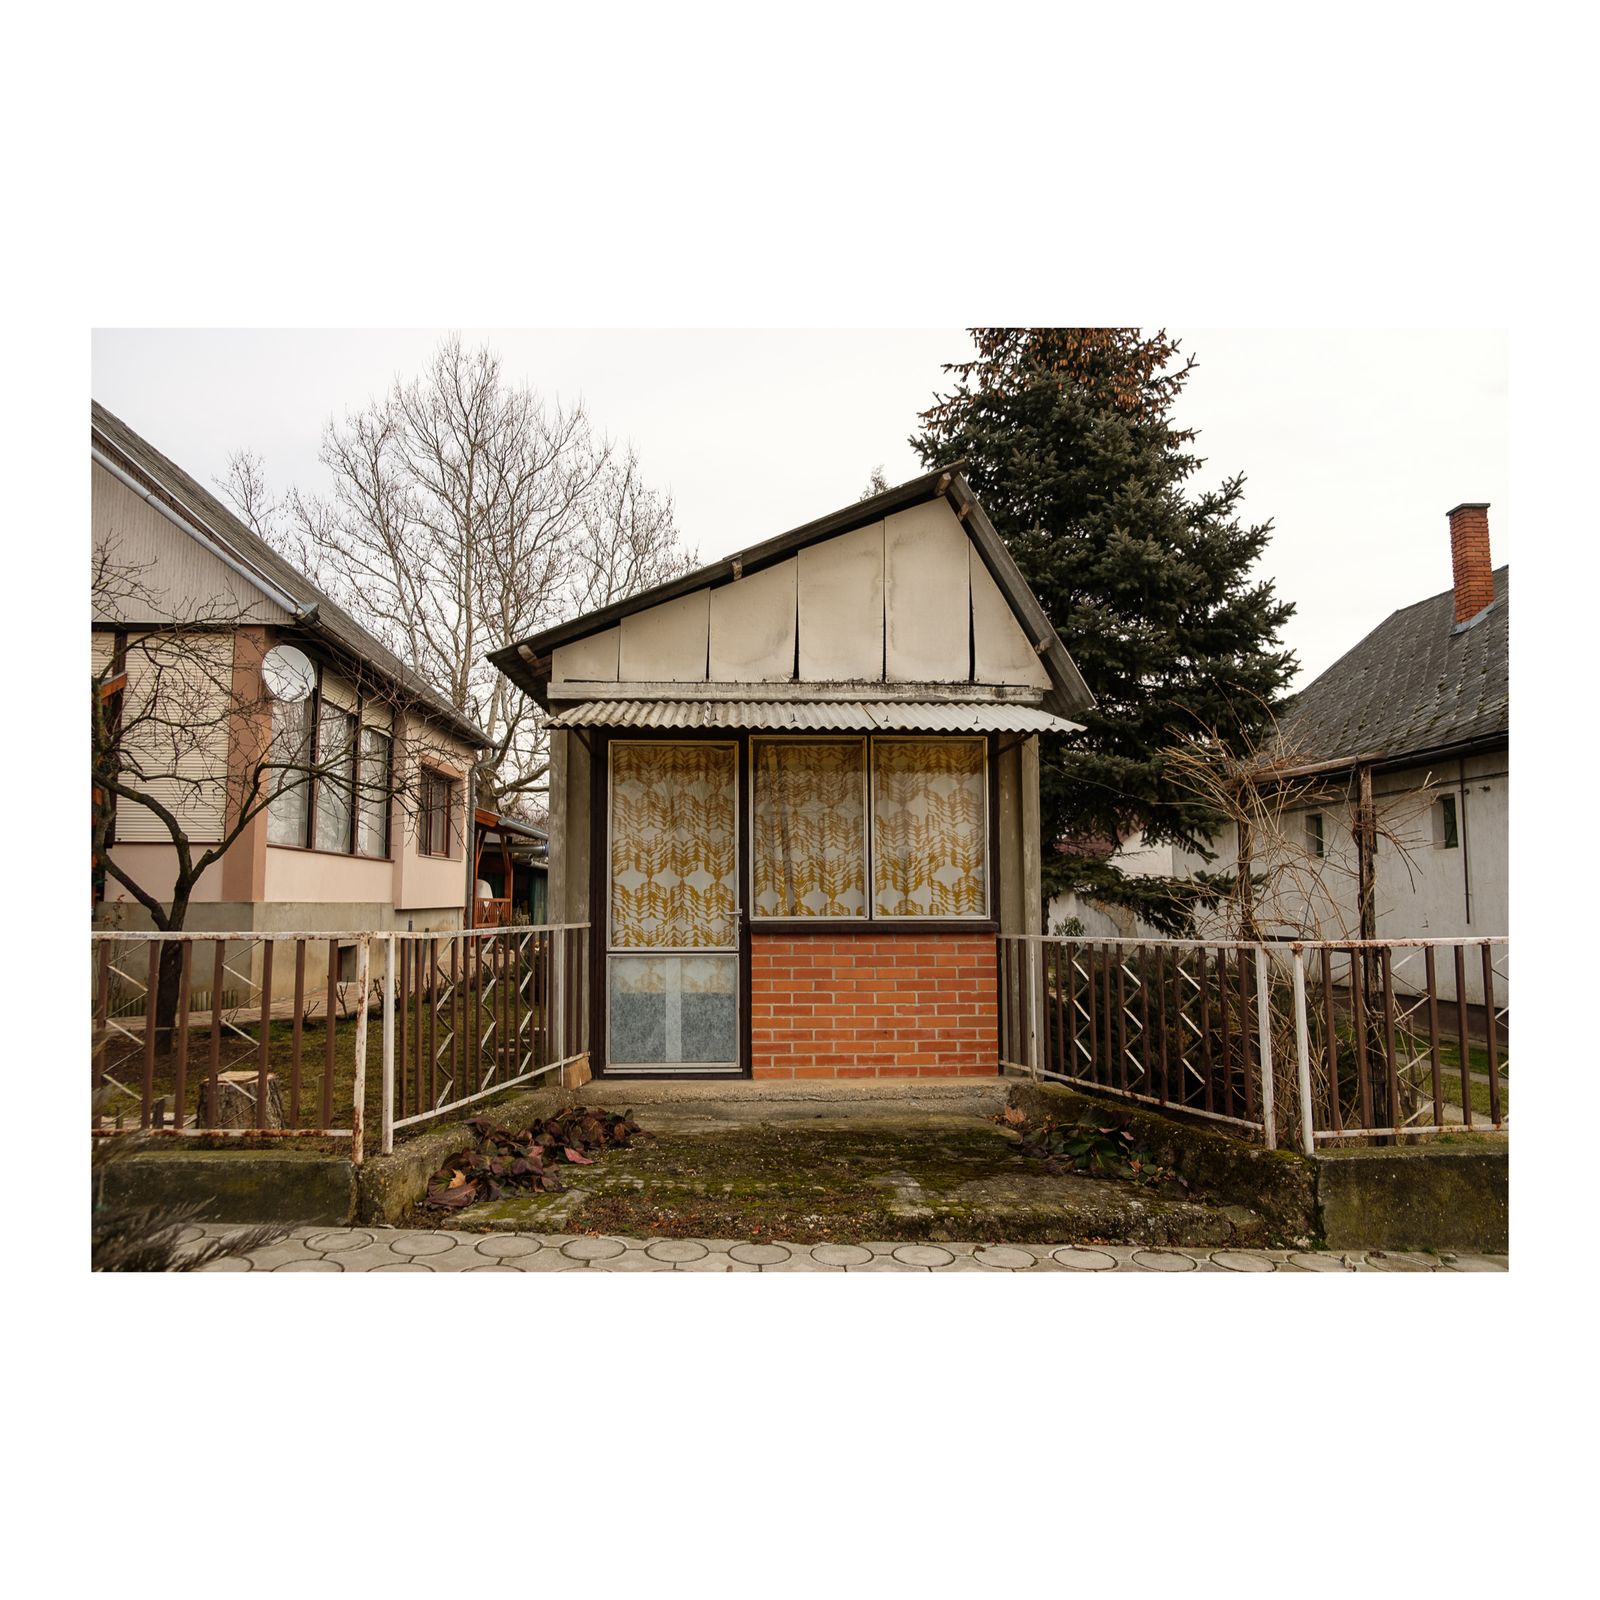 © Daniel Halasz - Image from the Village Project photography project